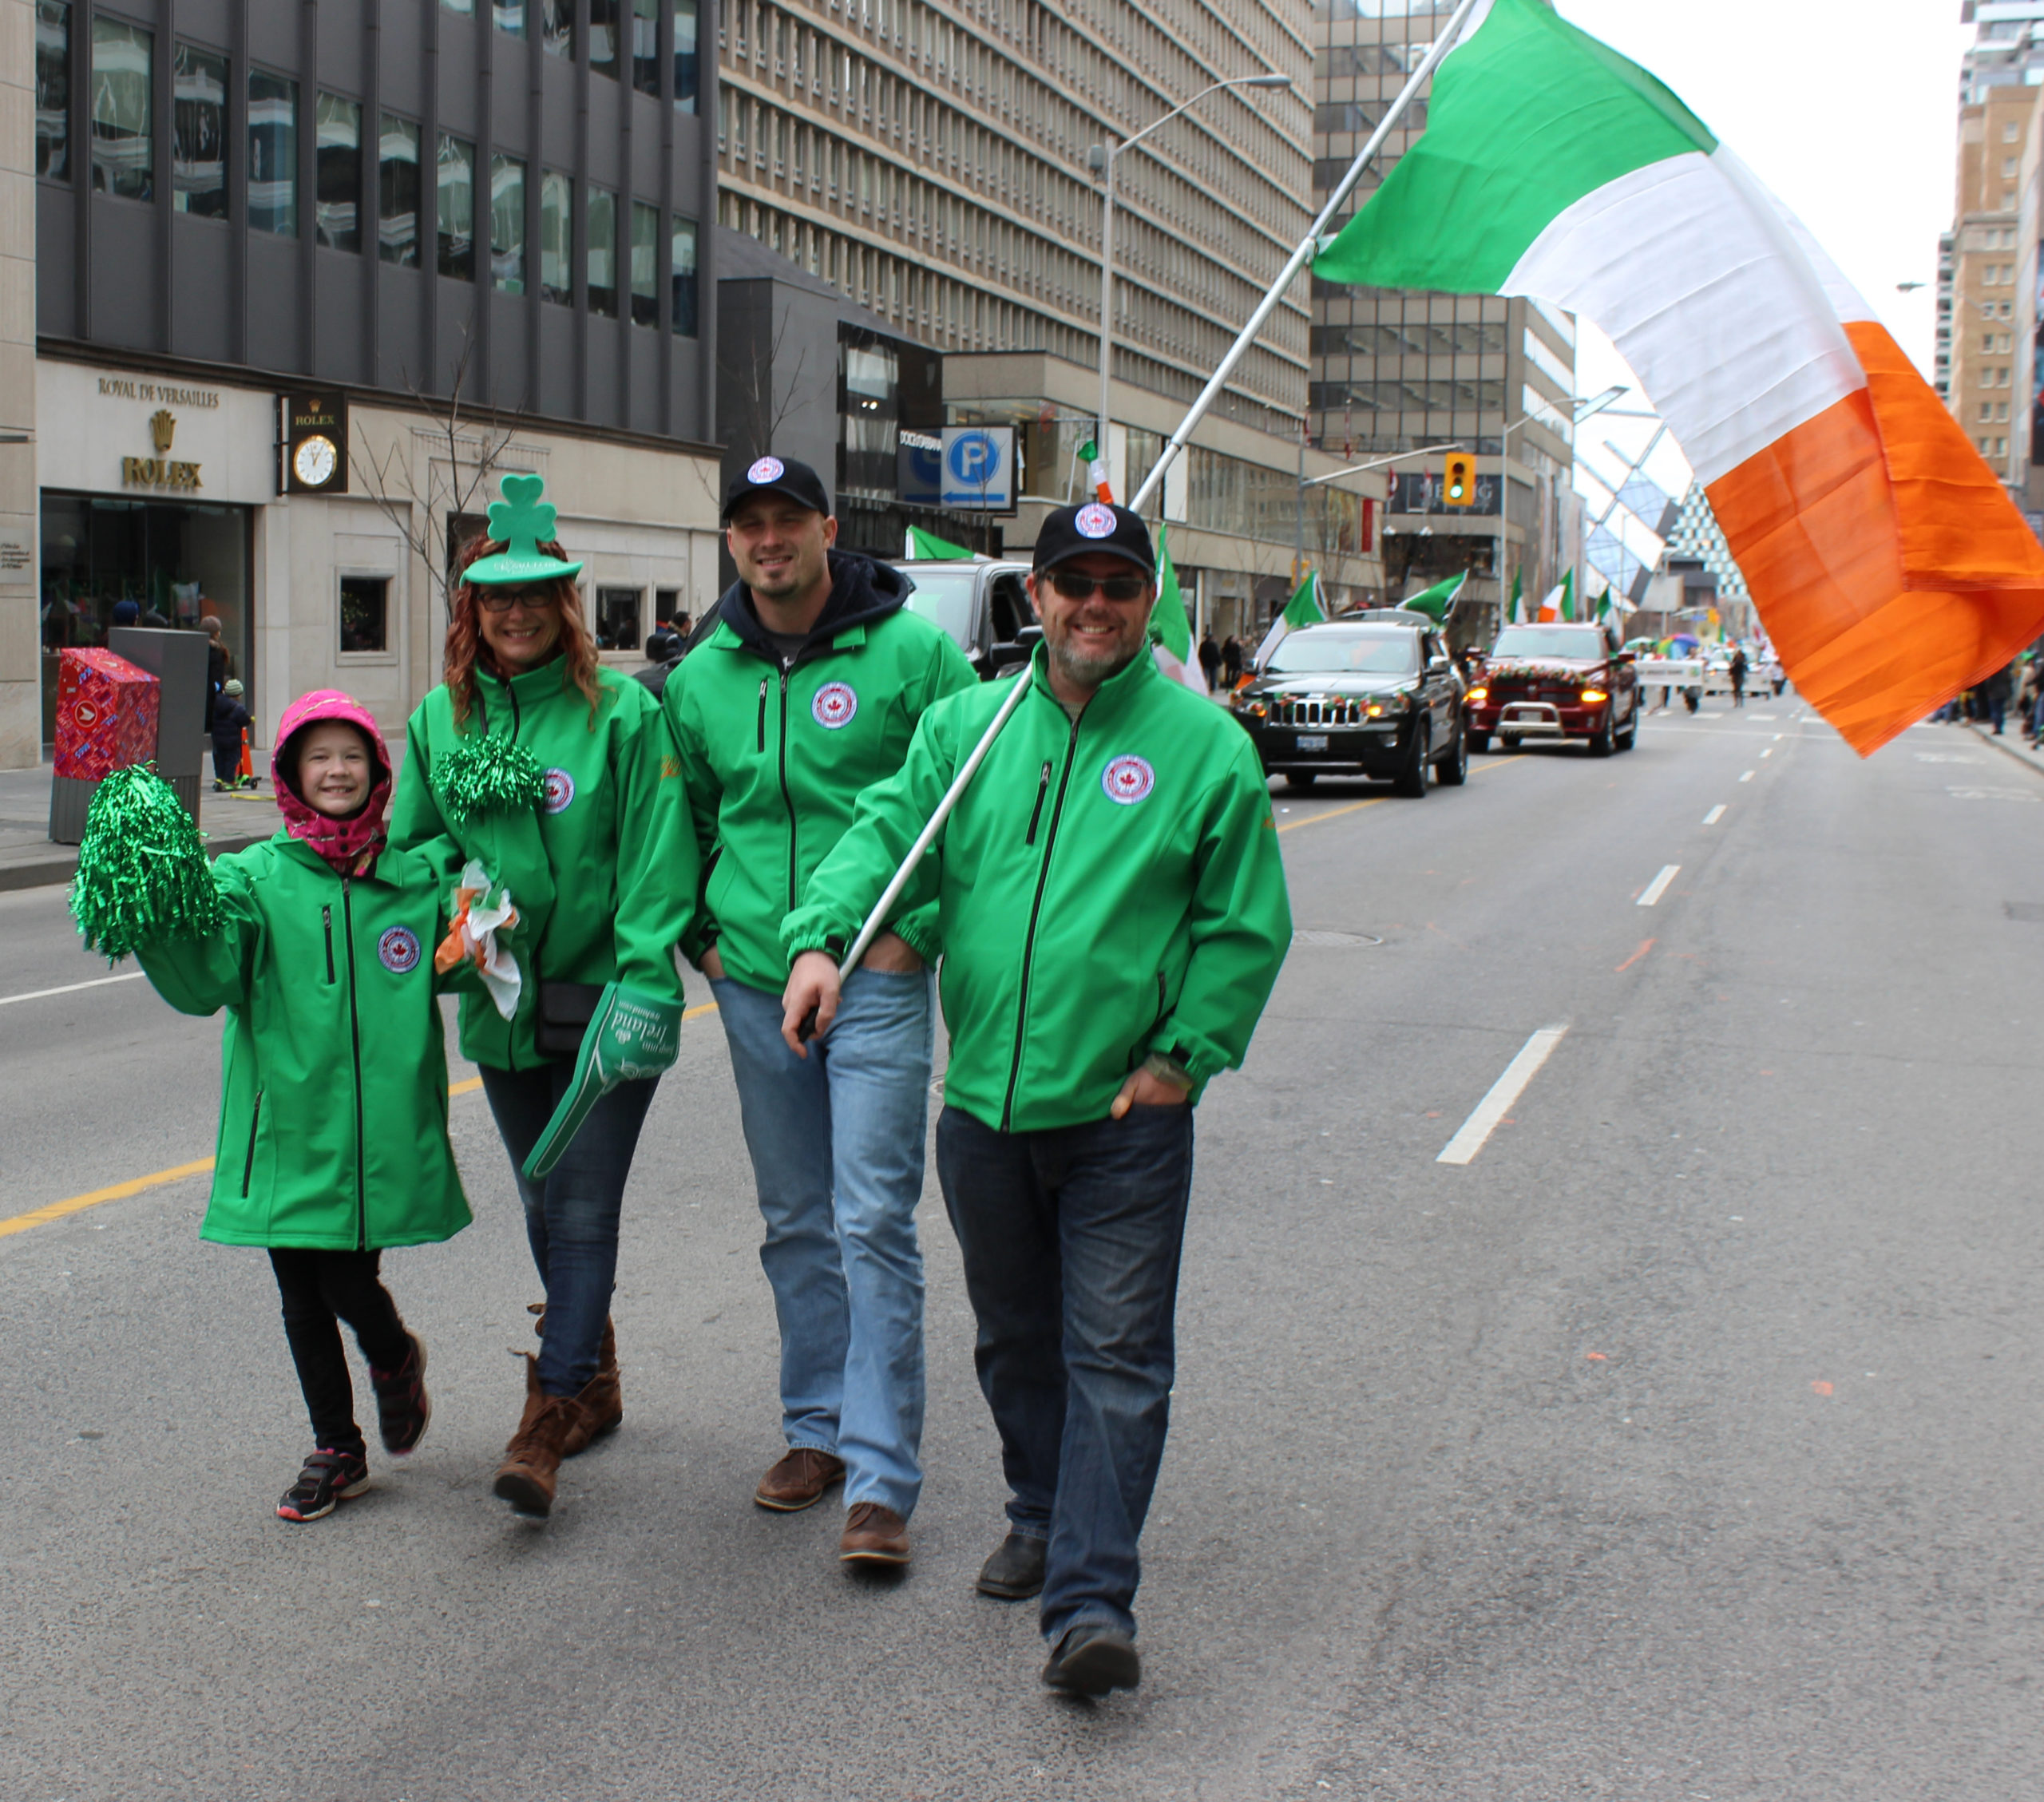 Local 793 members and their families march on the streets of downtown Toronto.